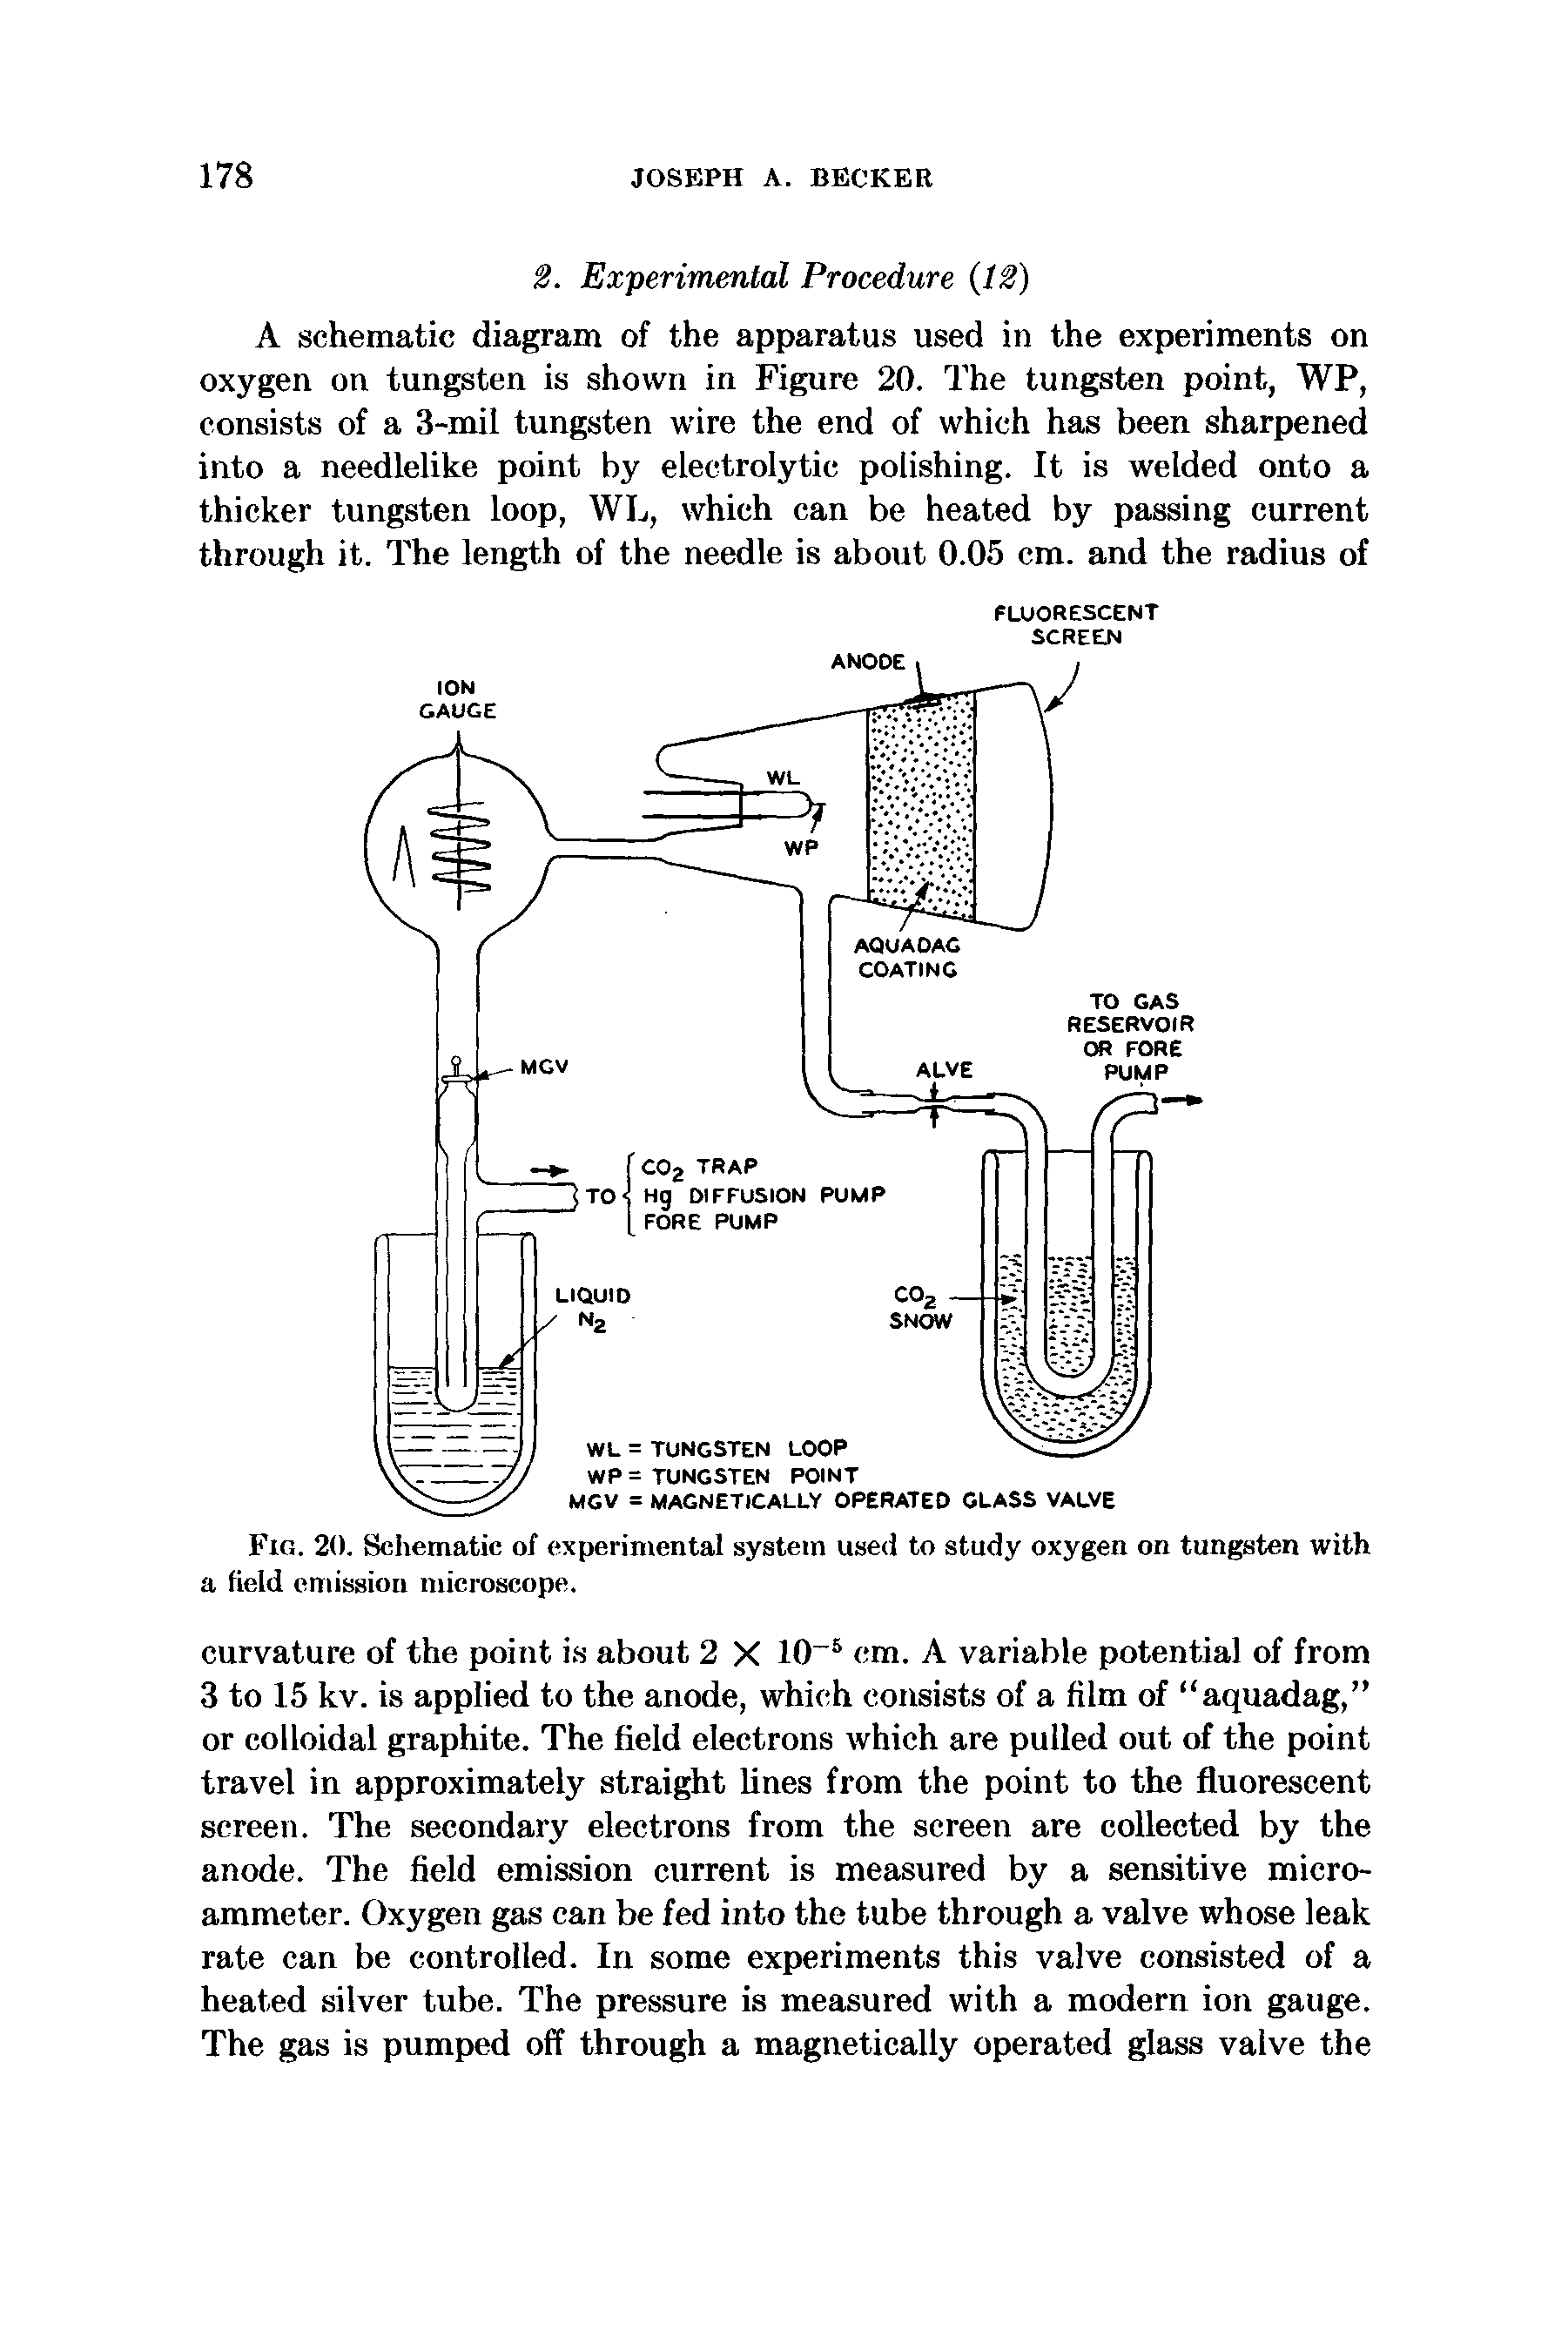 Fig. 20. Sclietnatic of experimental system used to study oxygen on tungsten with a field emission microscope.